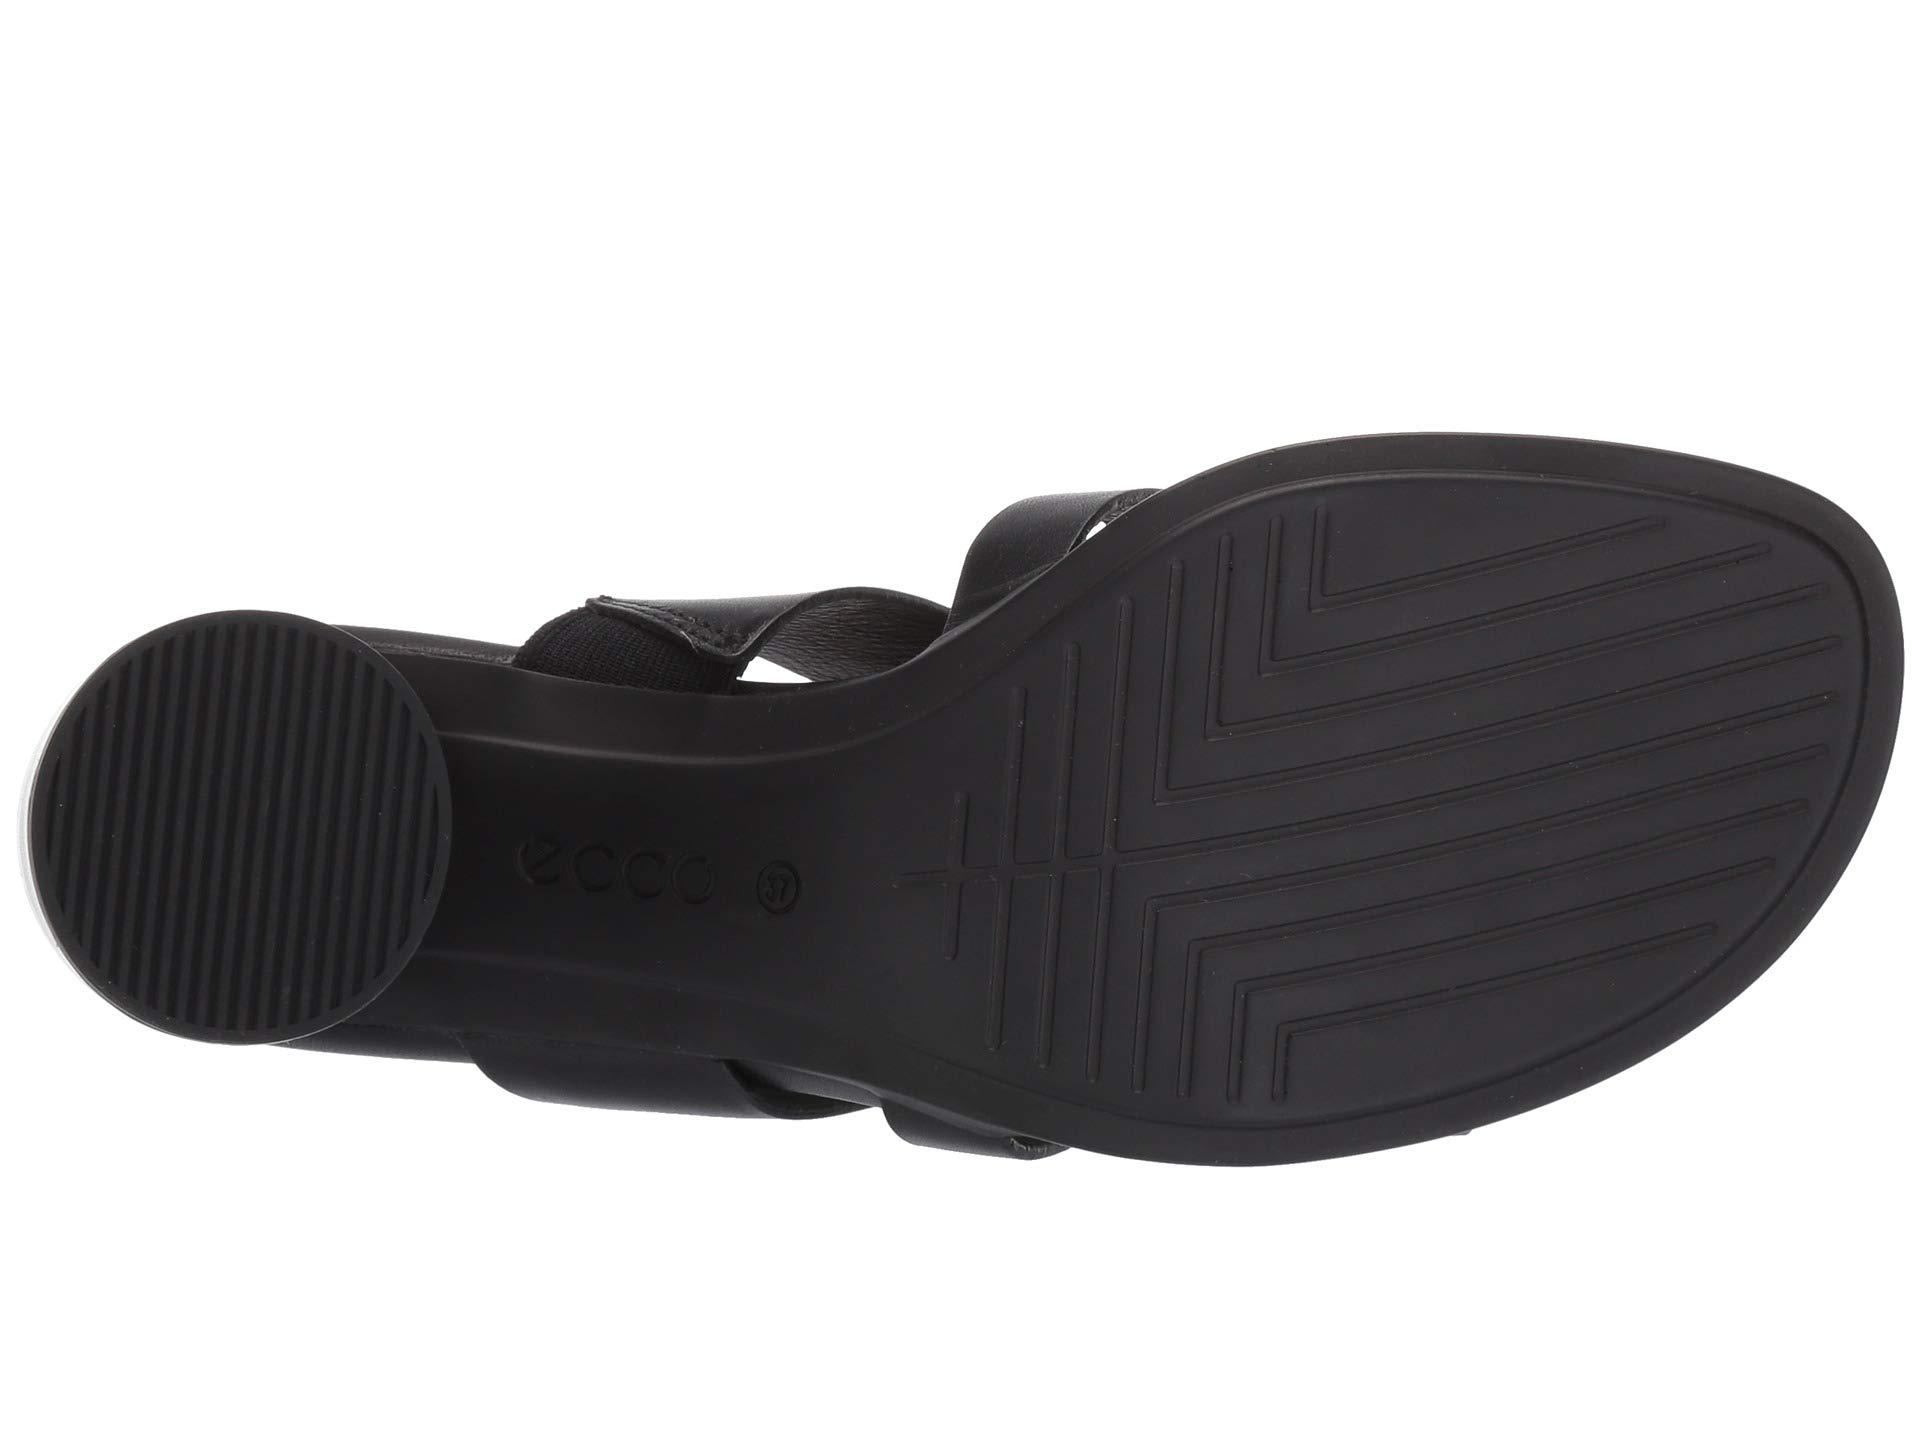 Ecco Leather Shape 65 Block Sandal in Black Leather (Black) - Save 70% -  Lyst